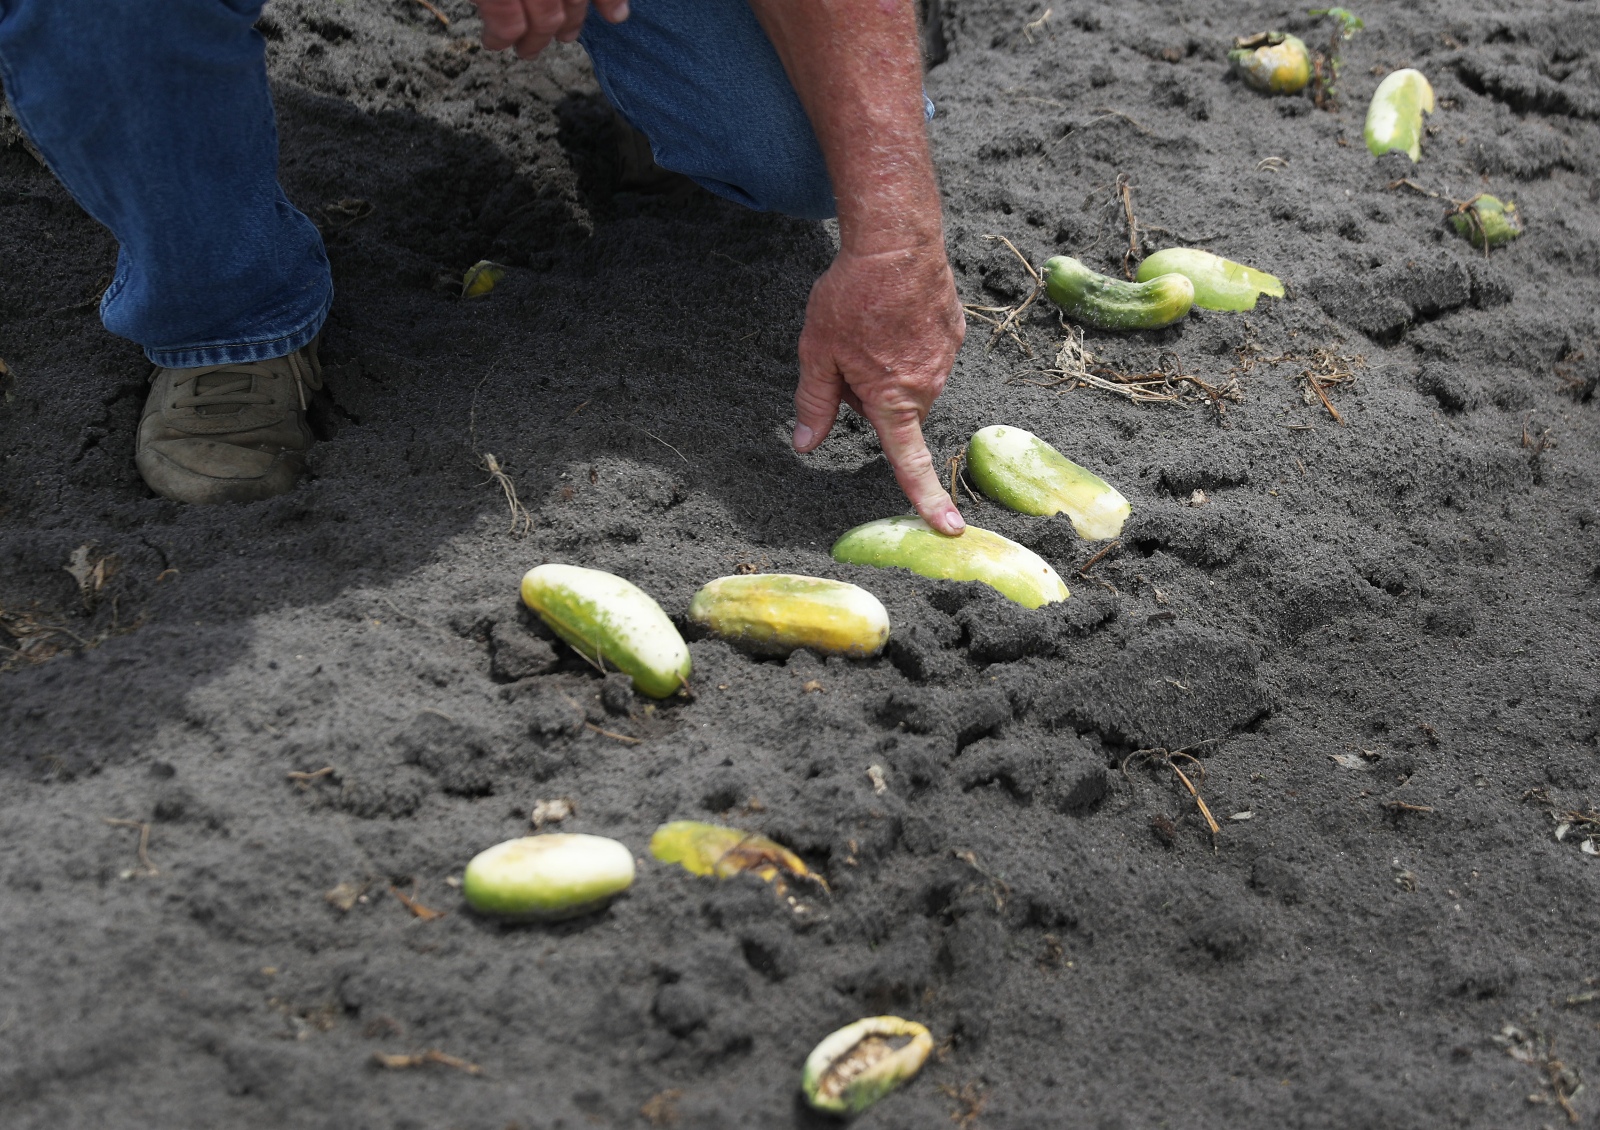 A hand points at rotting cucumbers lying in the dirt.